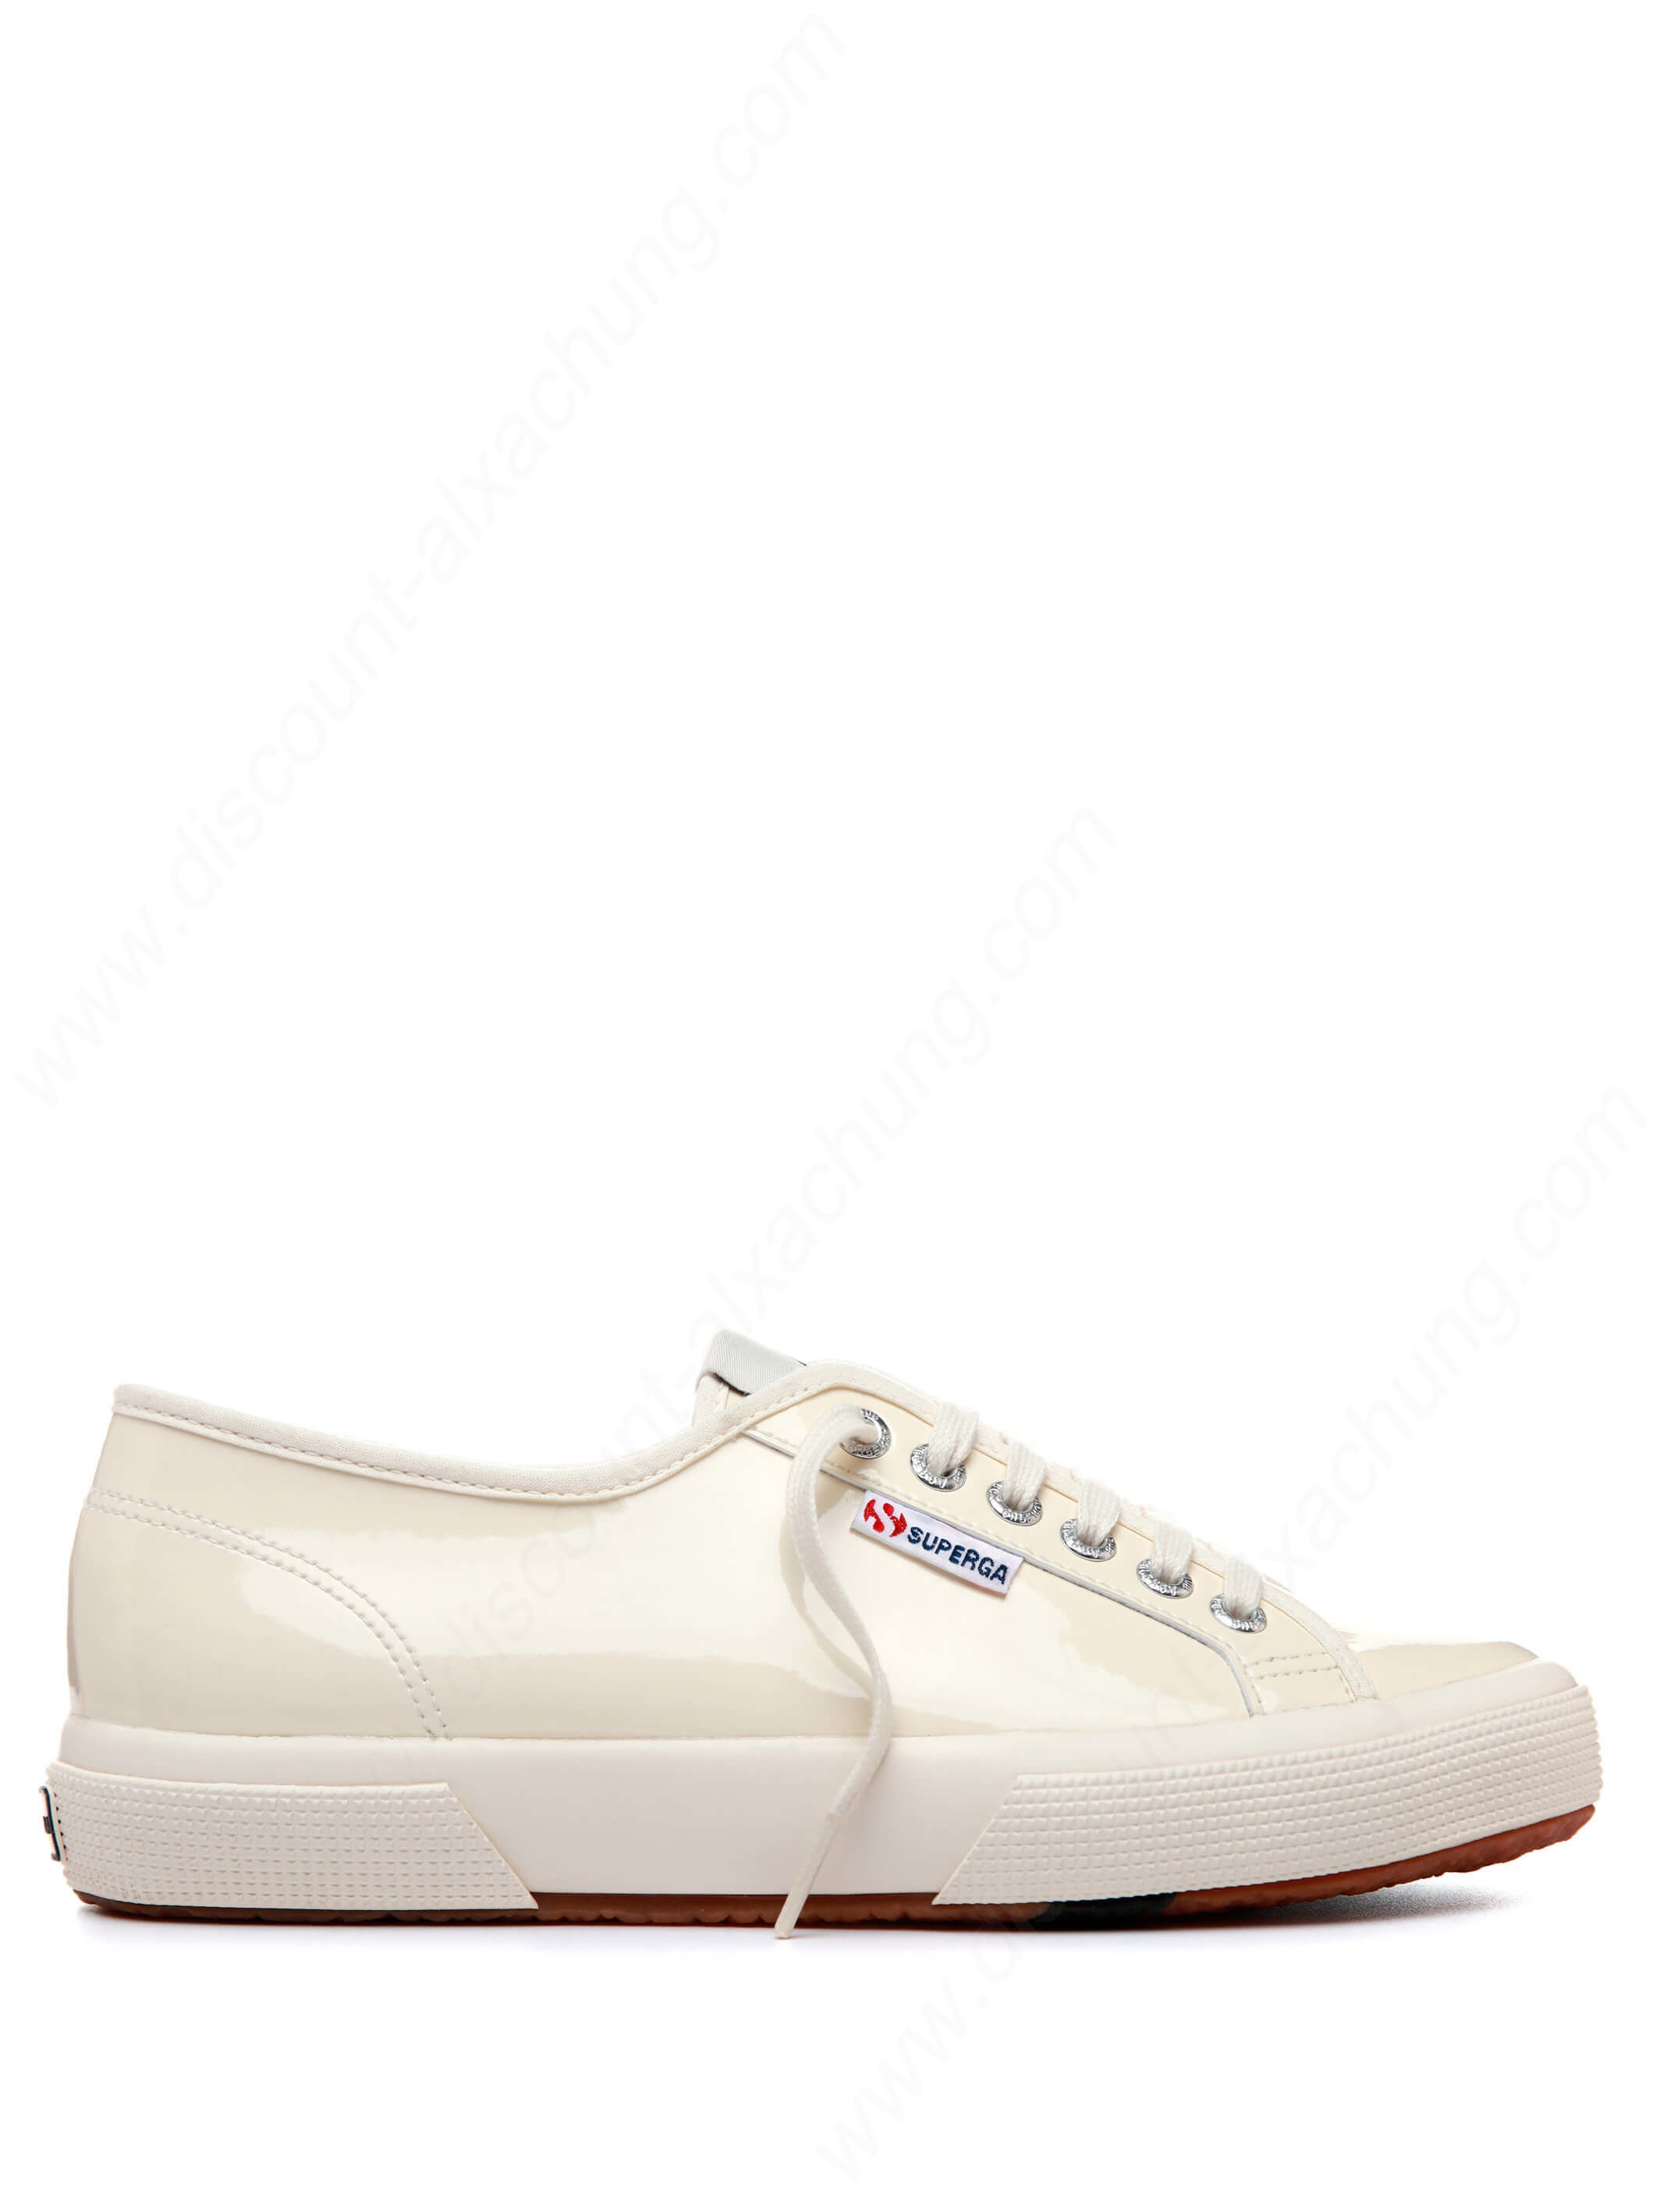 Alexachung Patent Is A Virtue Low Top - Alexachung Patent Is A Virtue Low Top